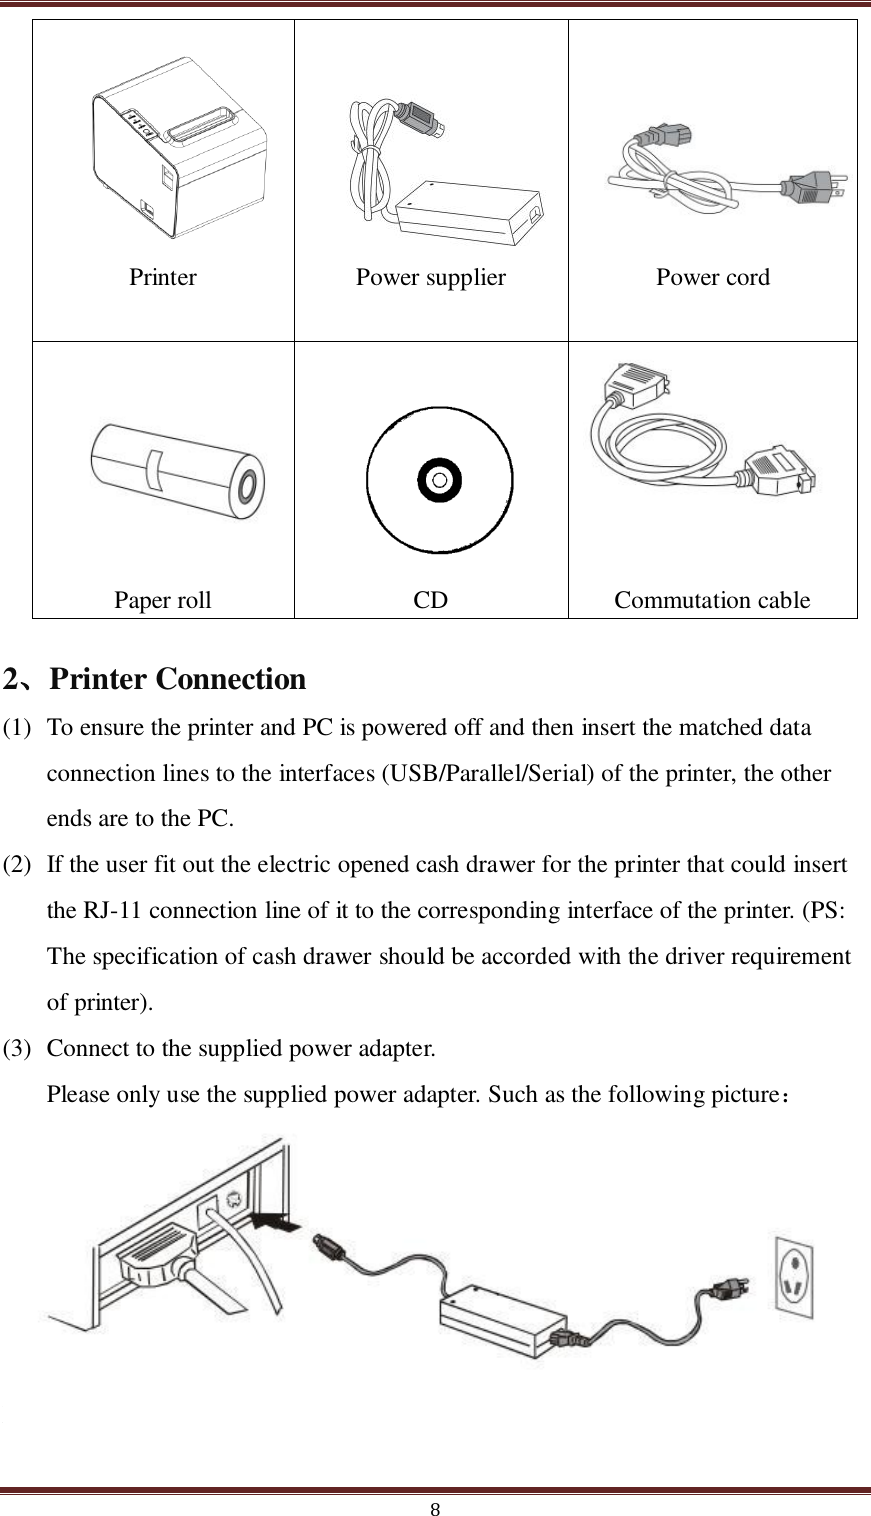  8      Printer        Power supplier      Power cord       Paper roll      CD      Commutation cable 2、Printer Connection (1) To ensure the printer and PC is powered off and then insert the matched data connection lines to the interfaces (USB/Parallel/Serial) of the printer, the other ends are to the PC. (2) If the user fit out the electric opened cash drawer for the printer that could insert the RJ-11 connection line of it to the corresponding interface of the printer. (PS: The specification of cash drawer should be accorded with the driver requirement of printer). (3) Connect to the supplied power adapter. Please only use the supplied power adapter. Such as the following picture：       Notice:  